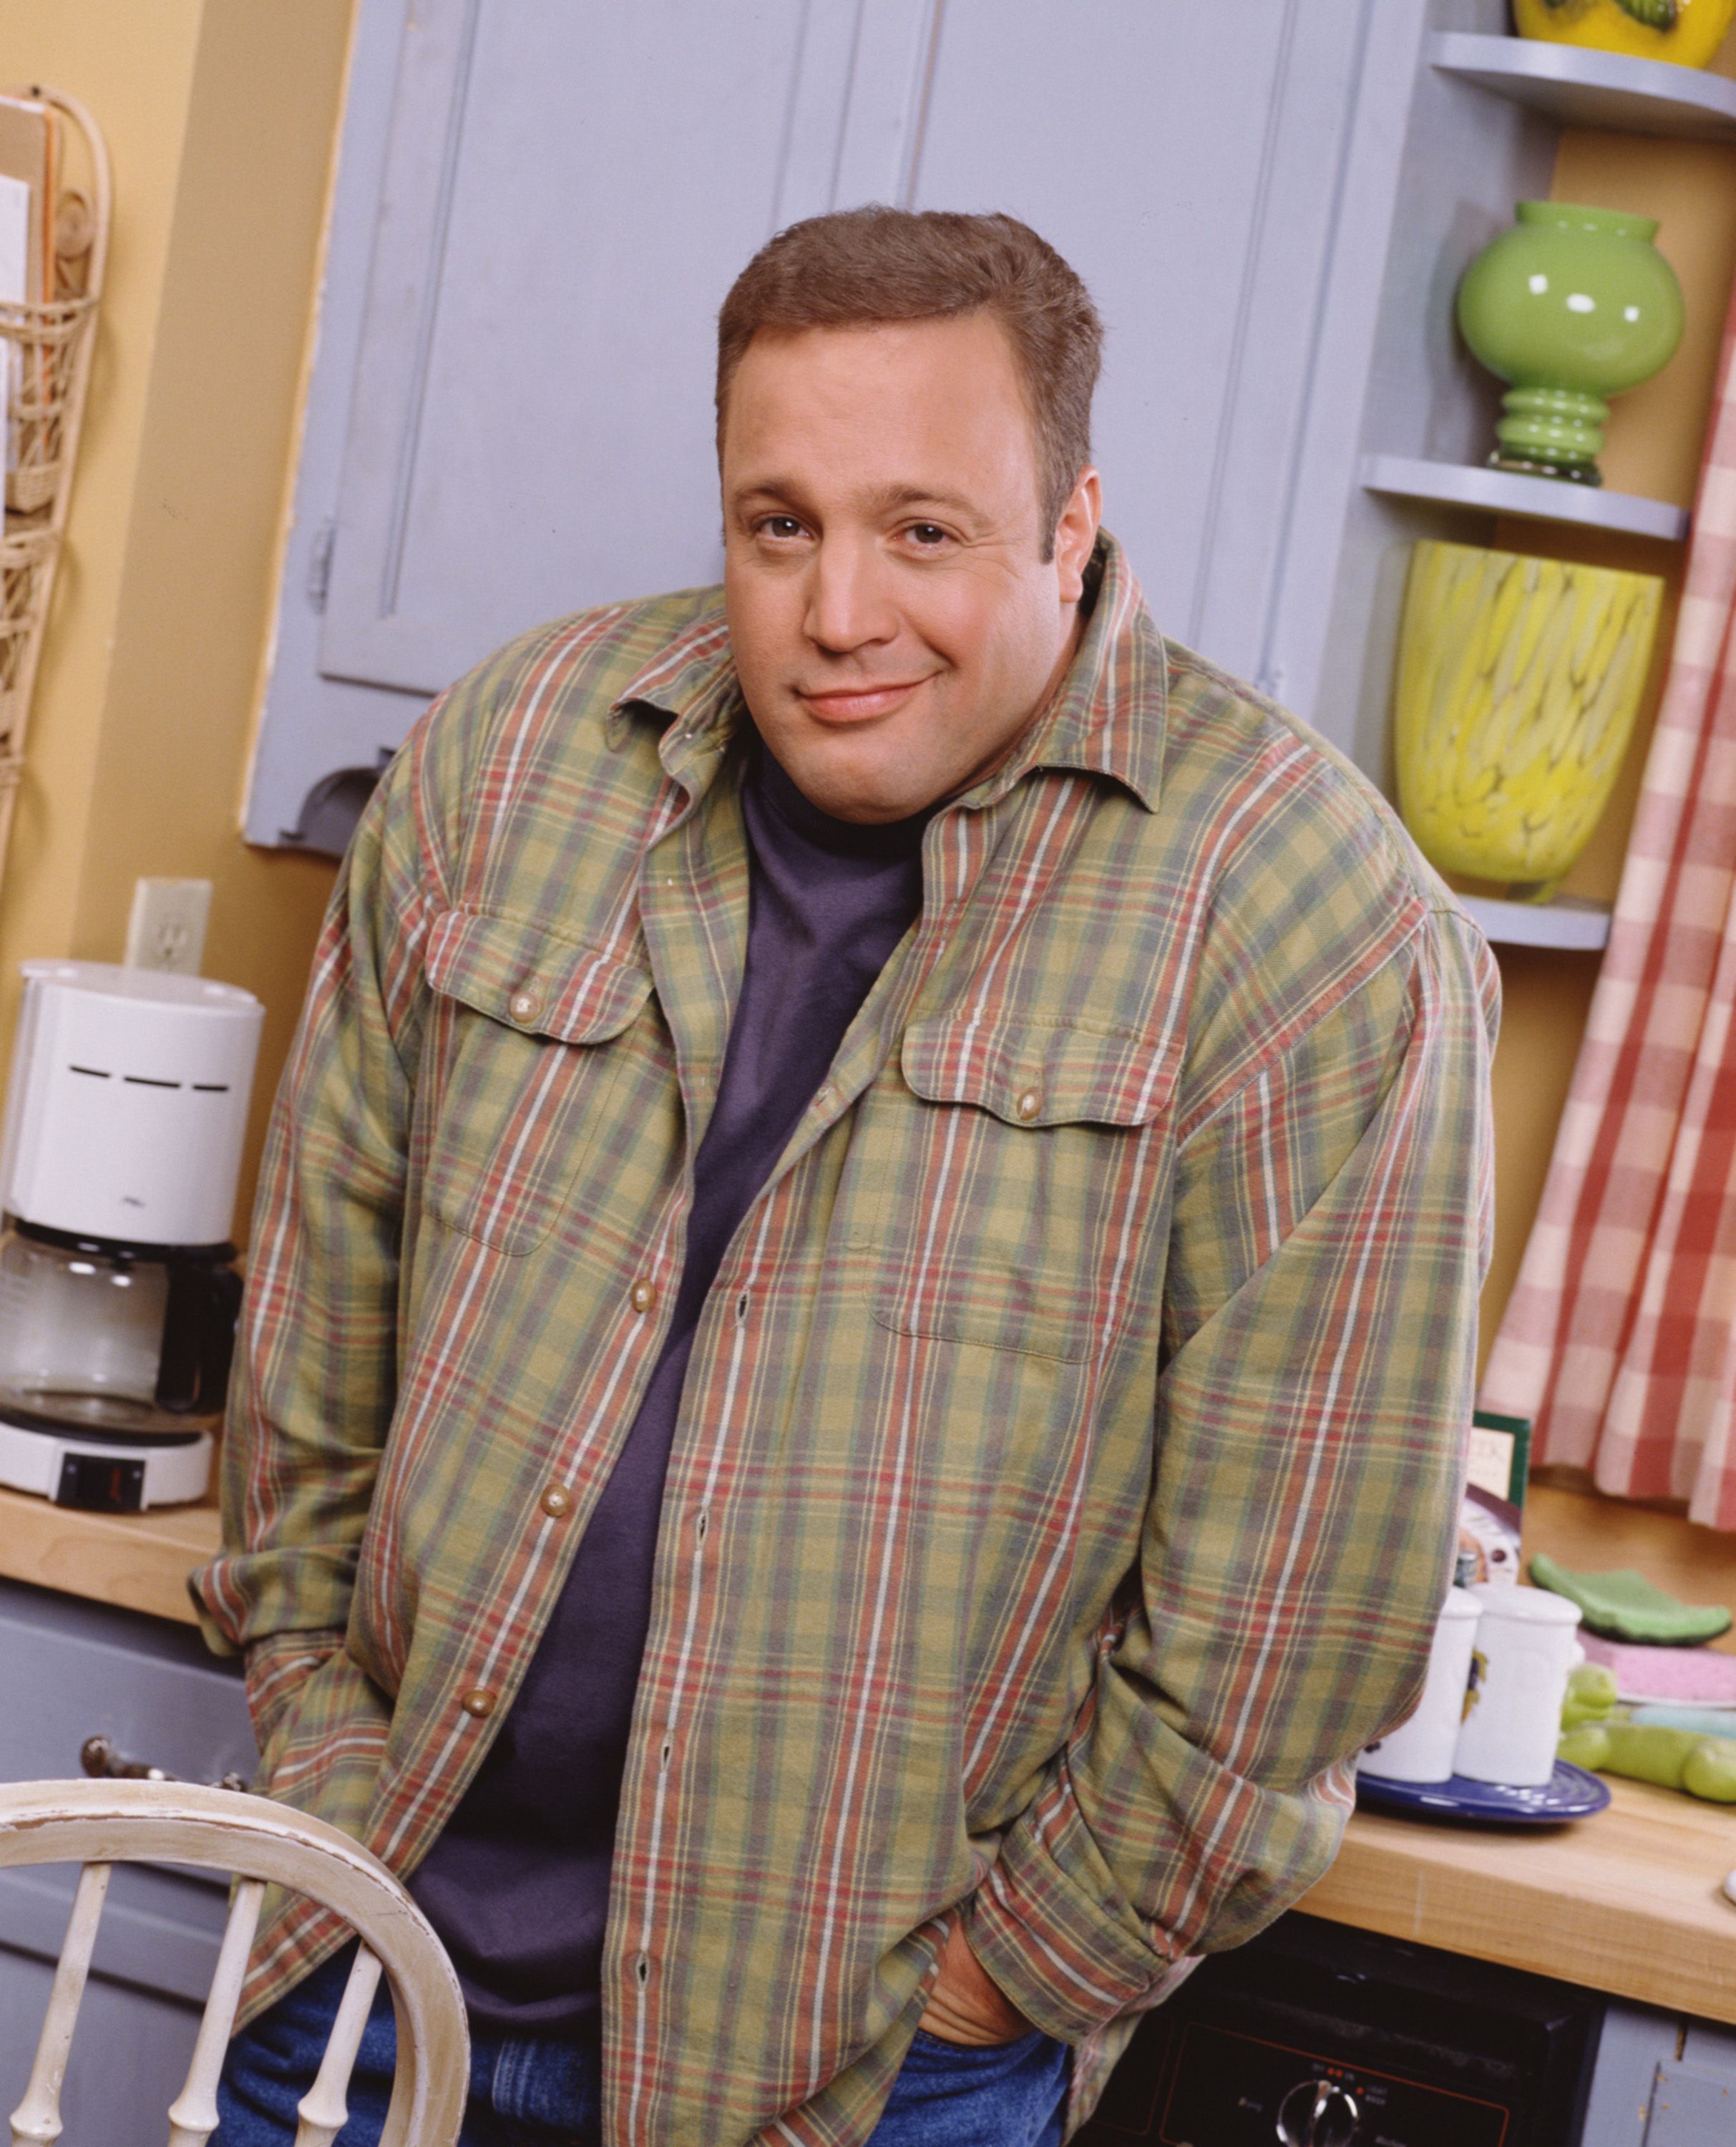 promotional-portrait-of-american-actor-and-comedian-kevin-news-photo-1695919981.jpg